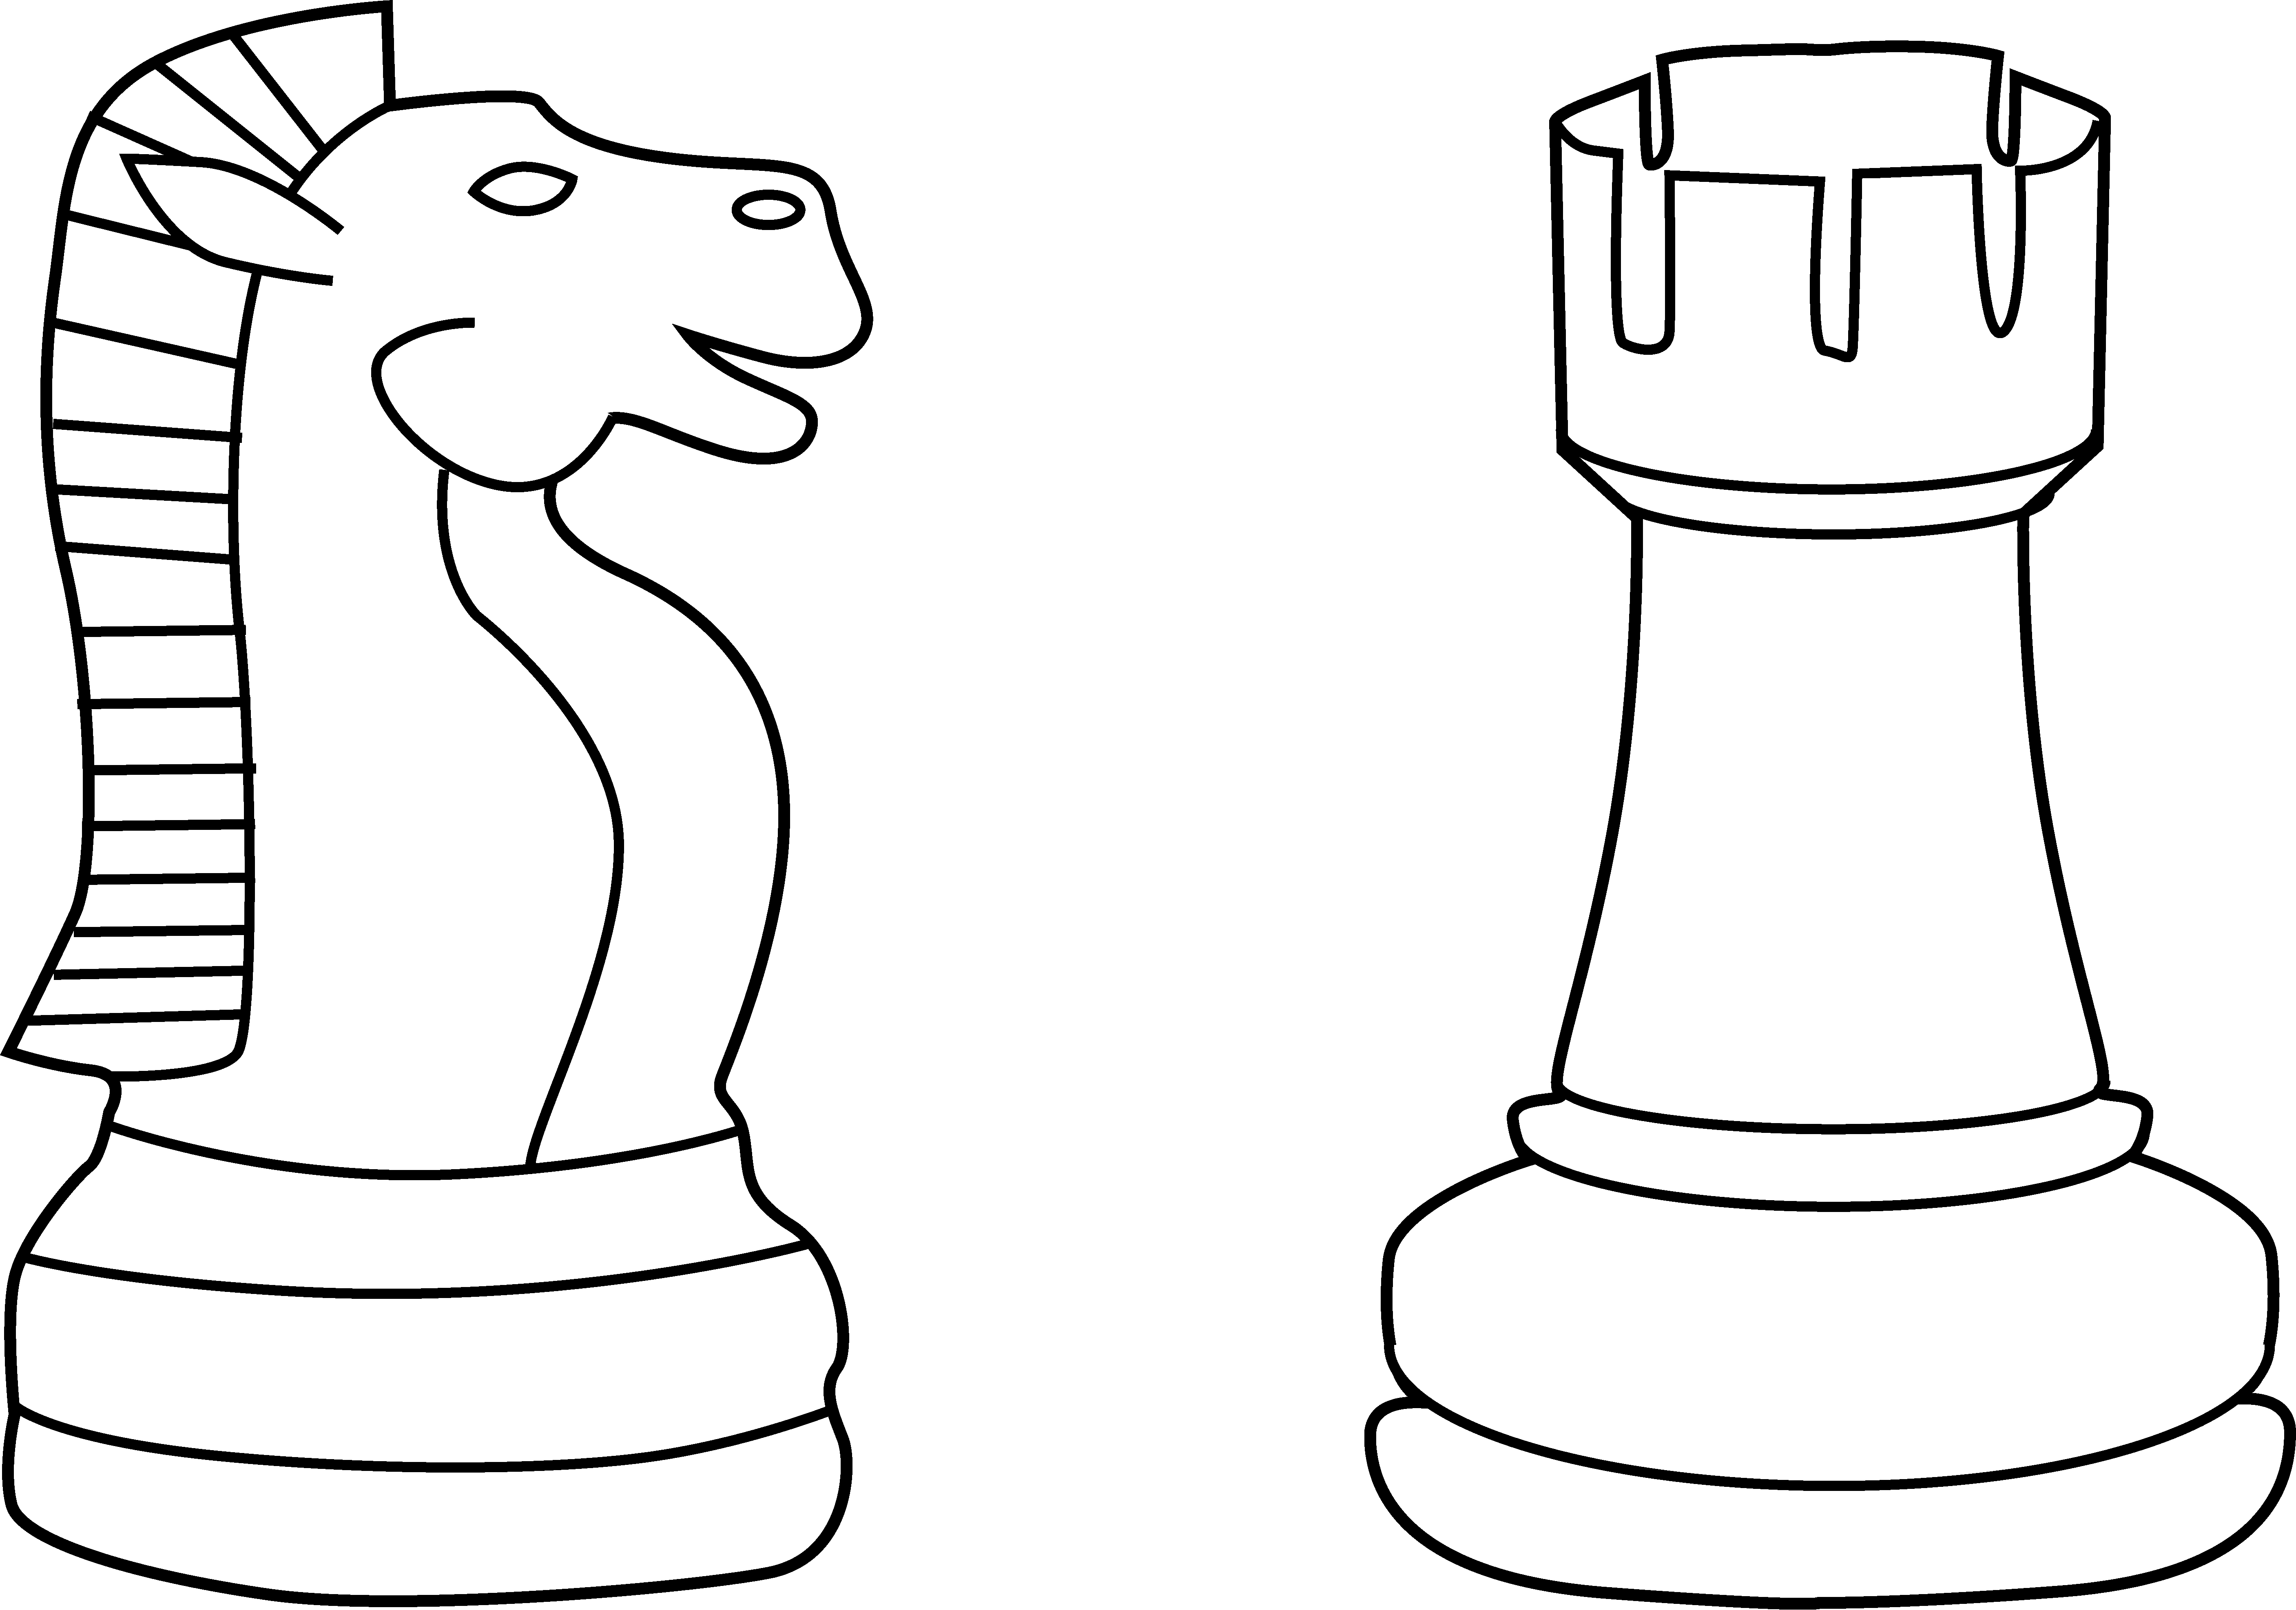 Chess Piece Clipart - Gallery